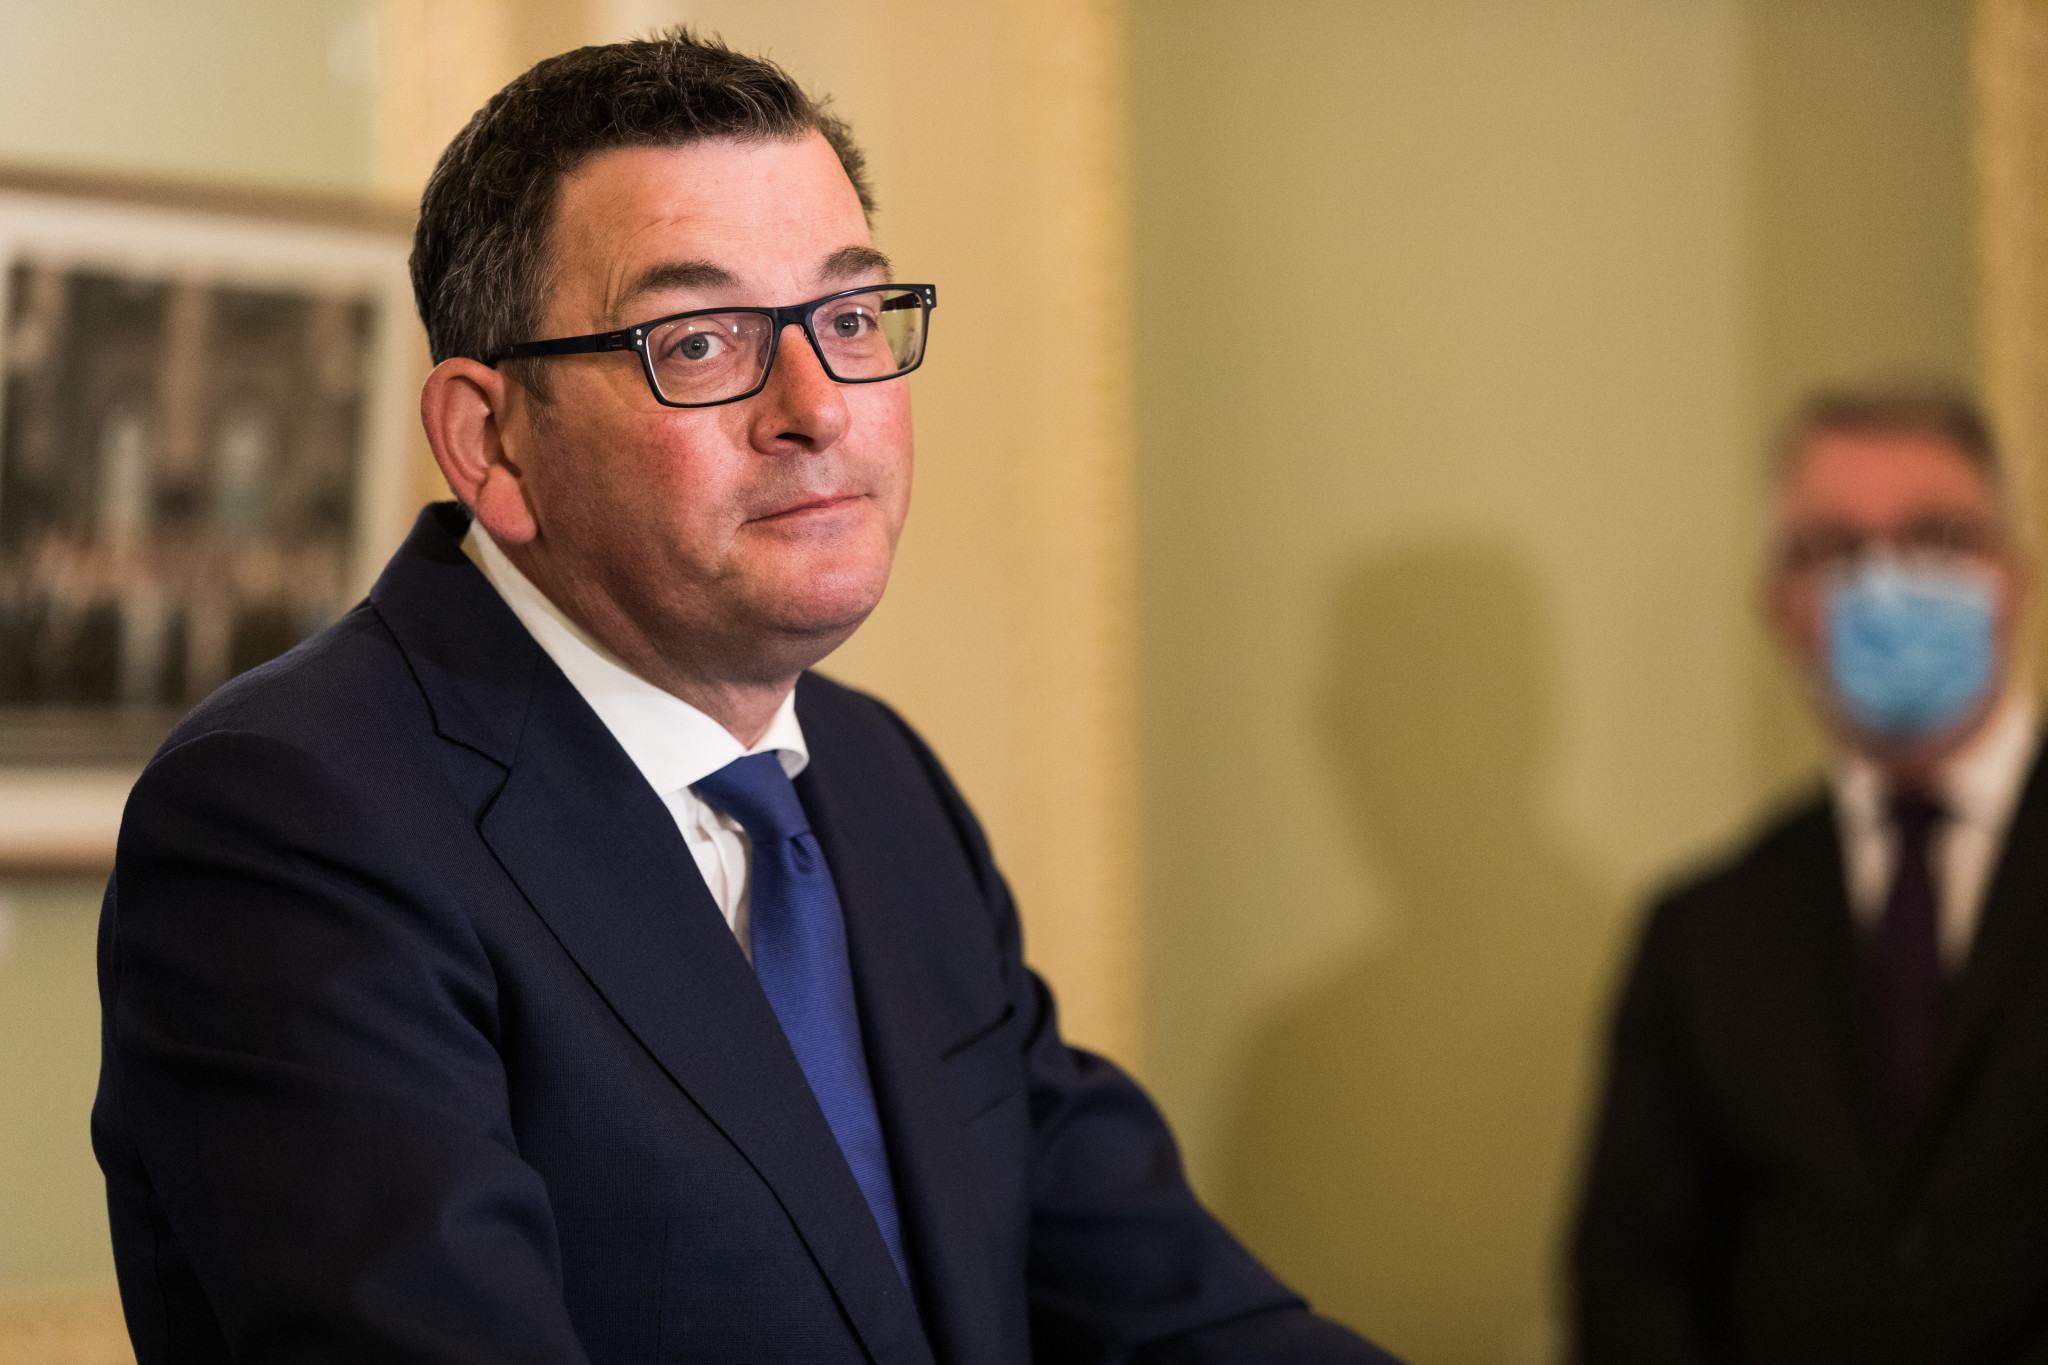 Victorian Premier Daniel Andrews is rivalling Liberal leader Matthew Guy in the upcoming state elections next month ©Getty Images